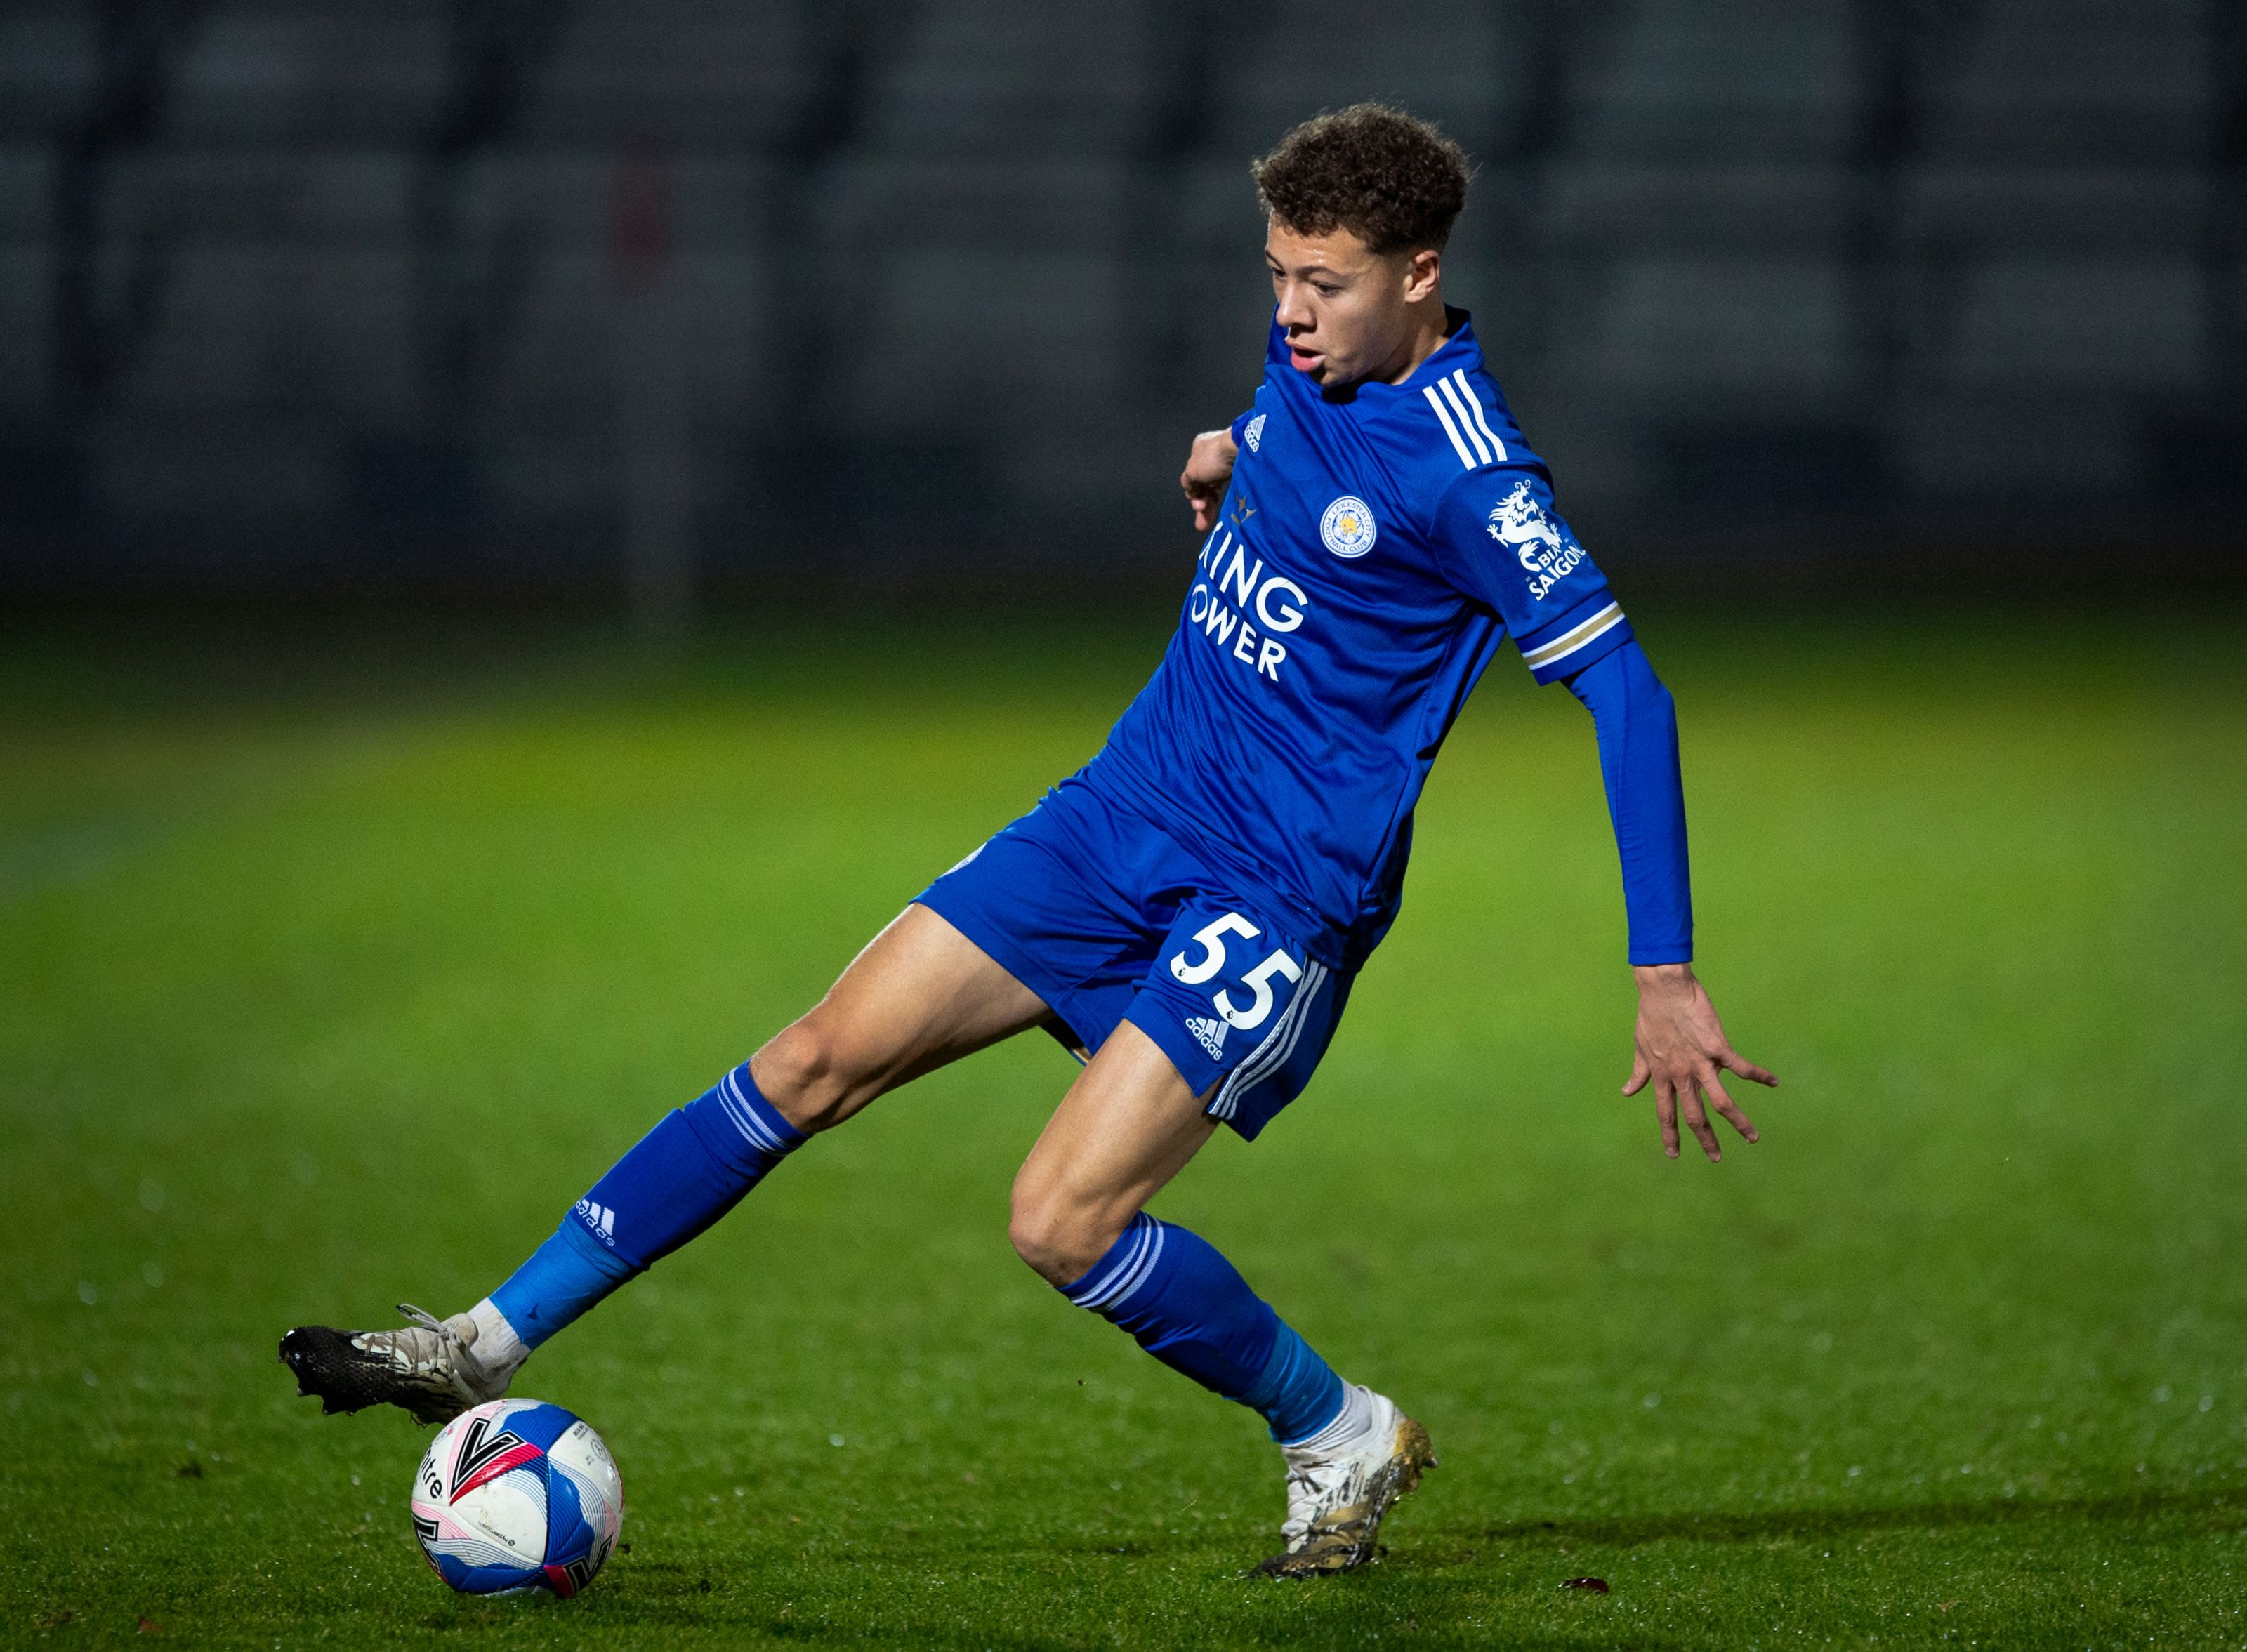 Leicester City youth Kasey McAteer promoted to senior squad